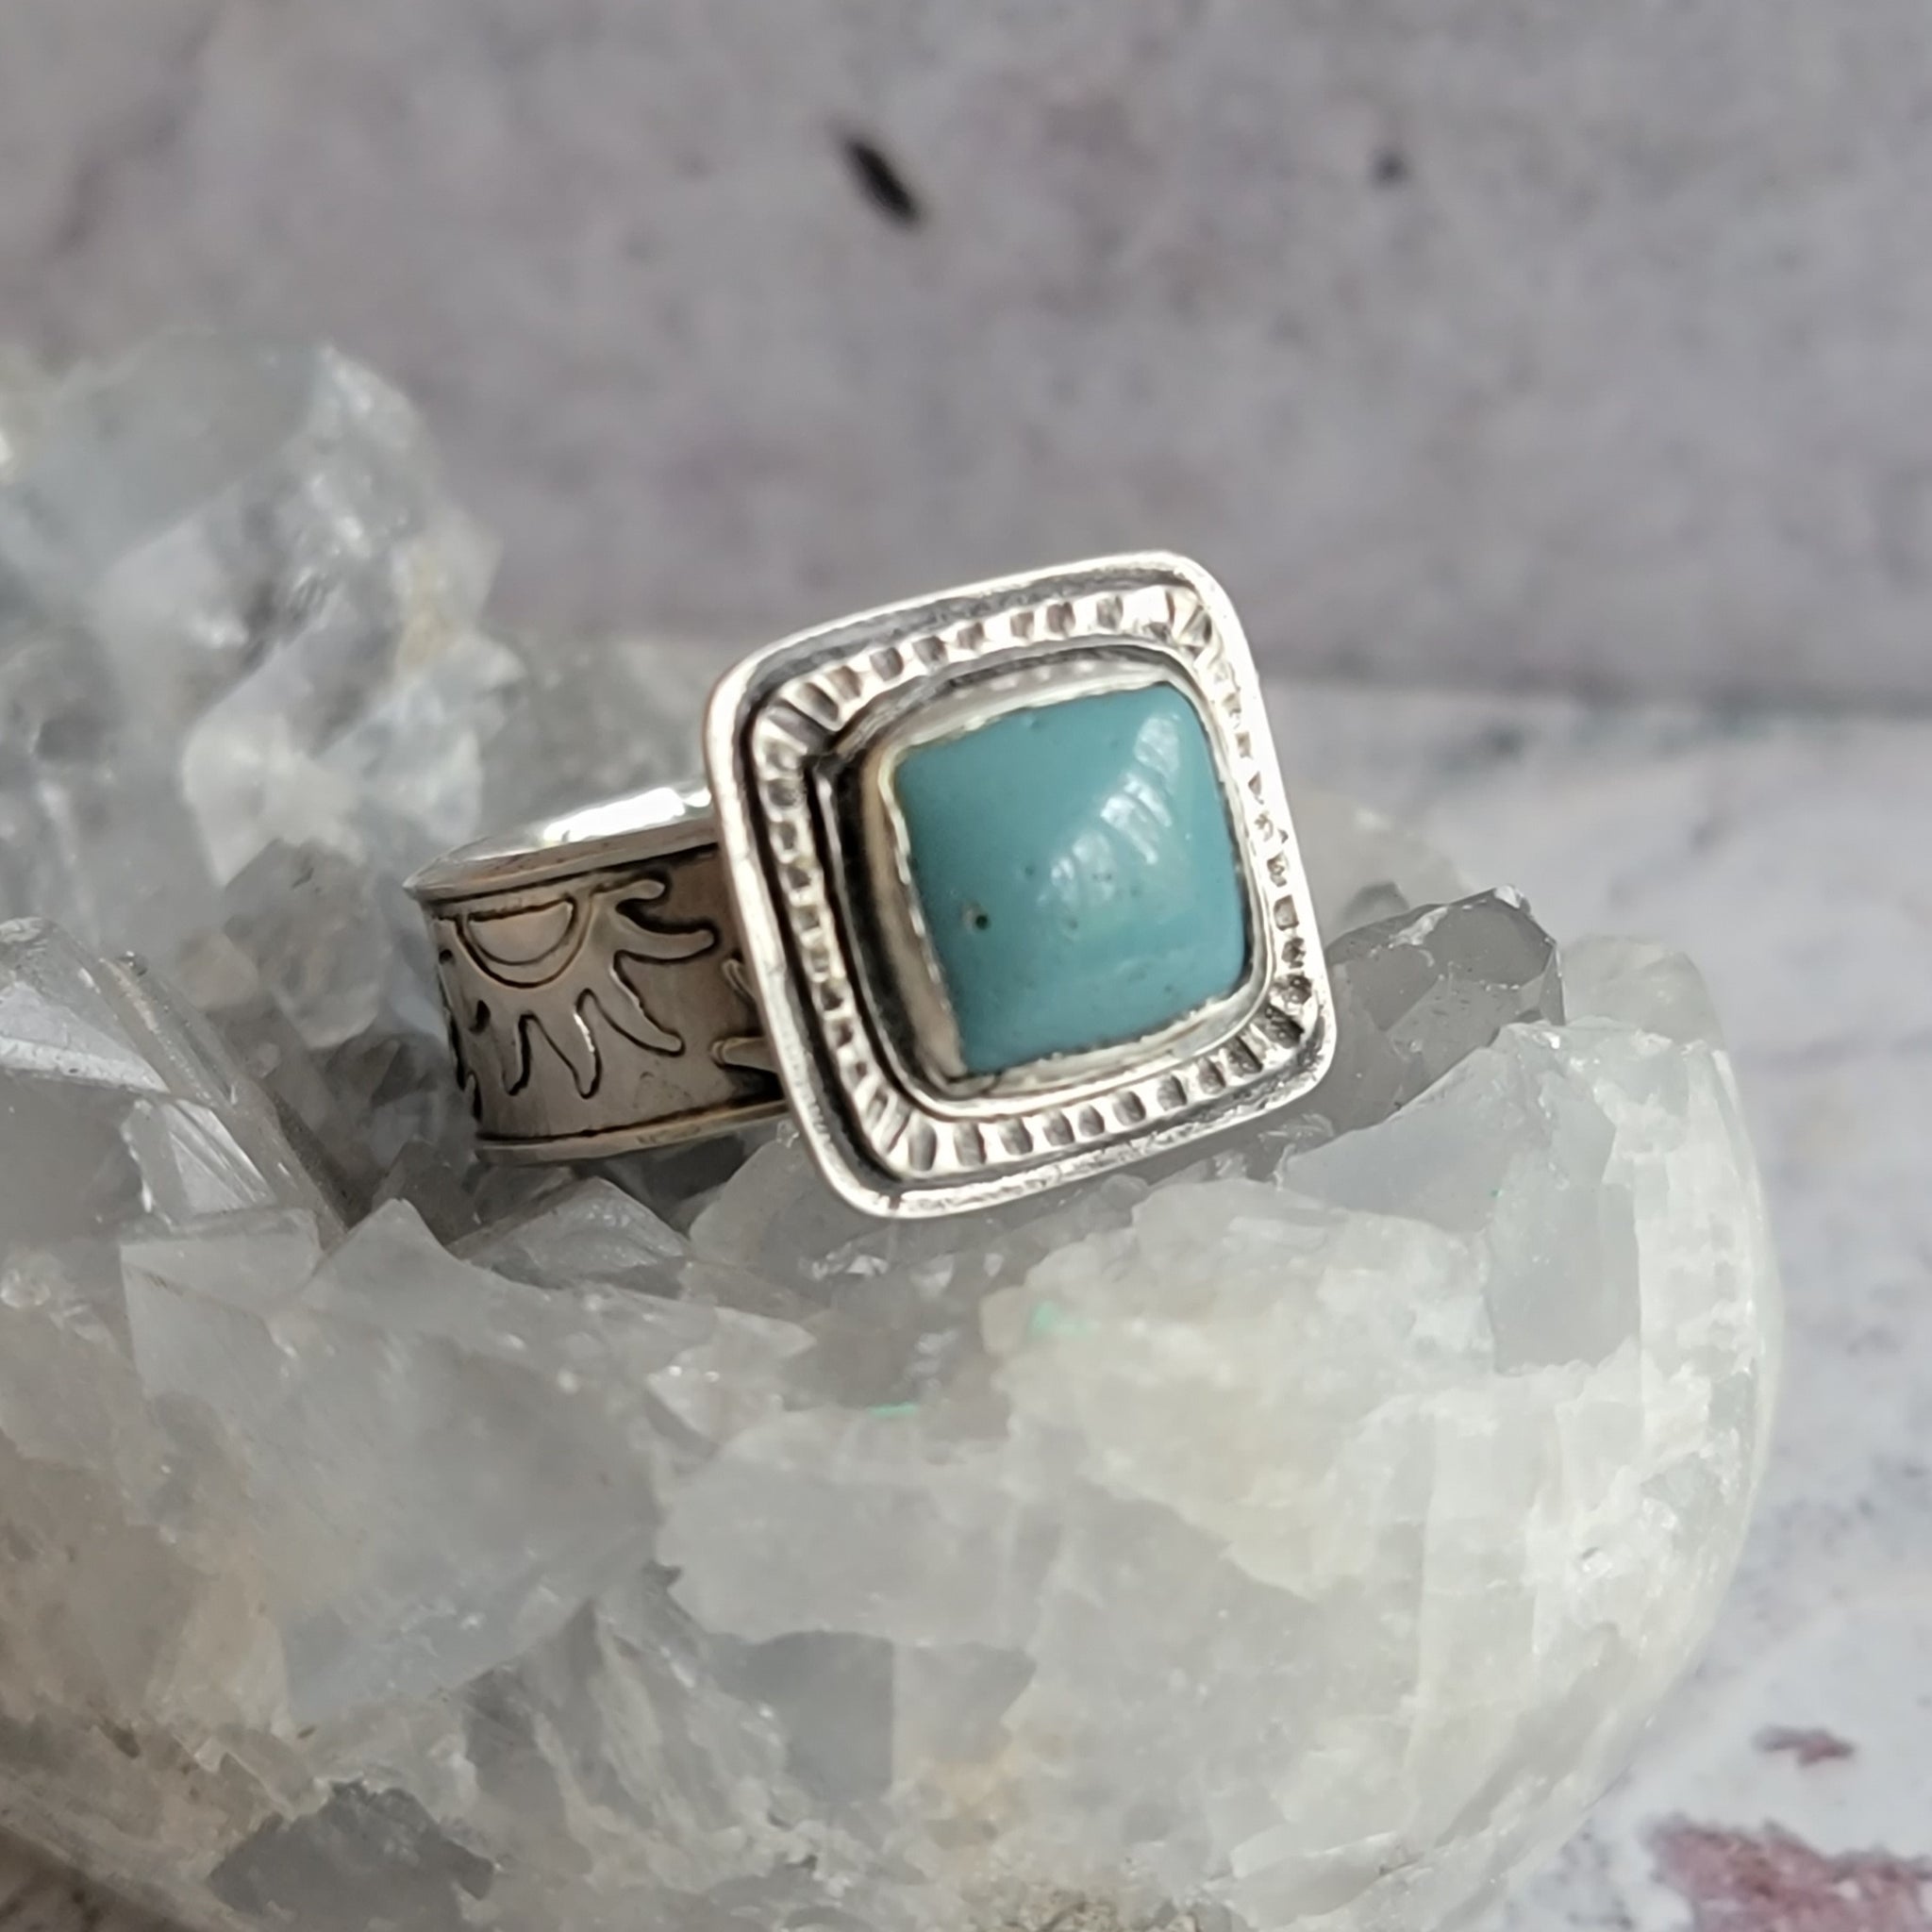 Chunky Leland Blue Sunrise Ring in Sterling Silver Size 10.75